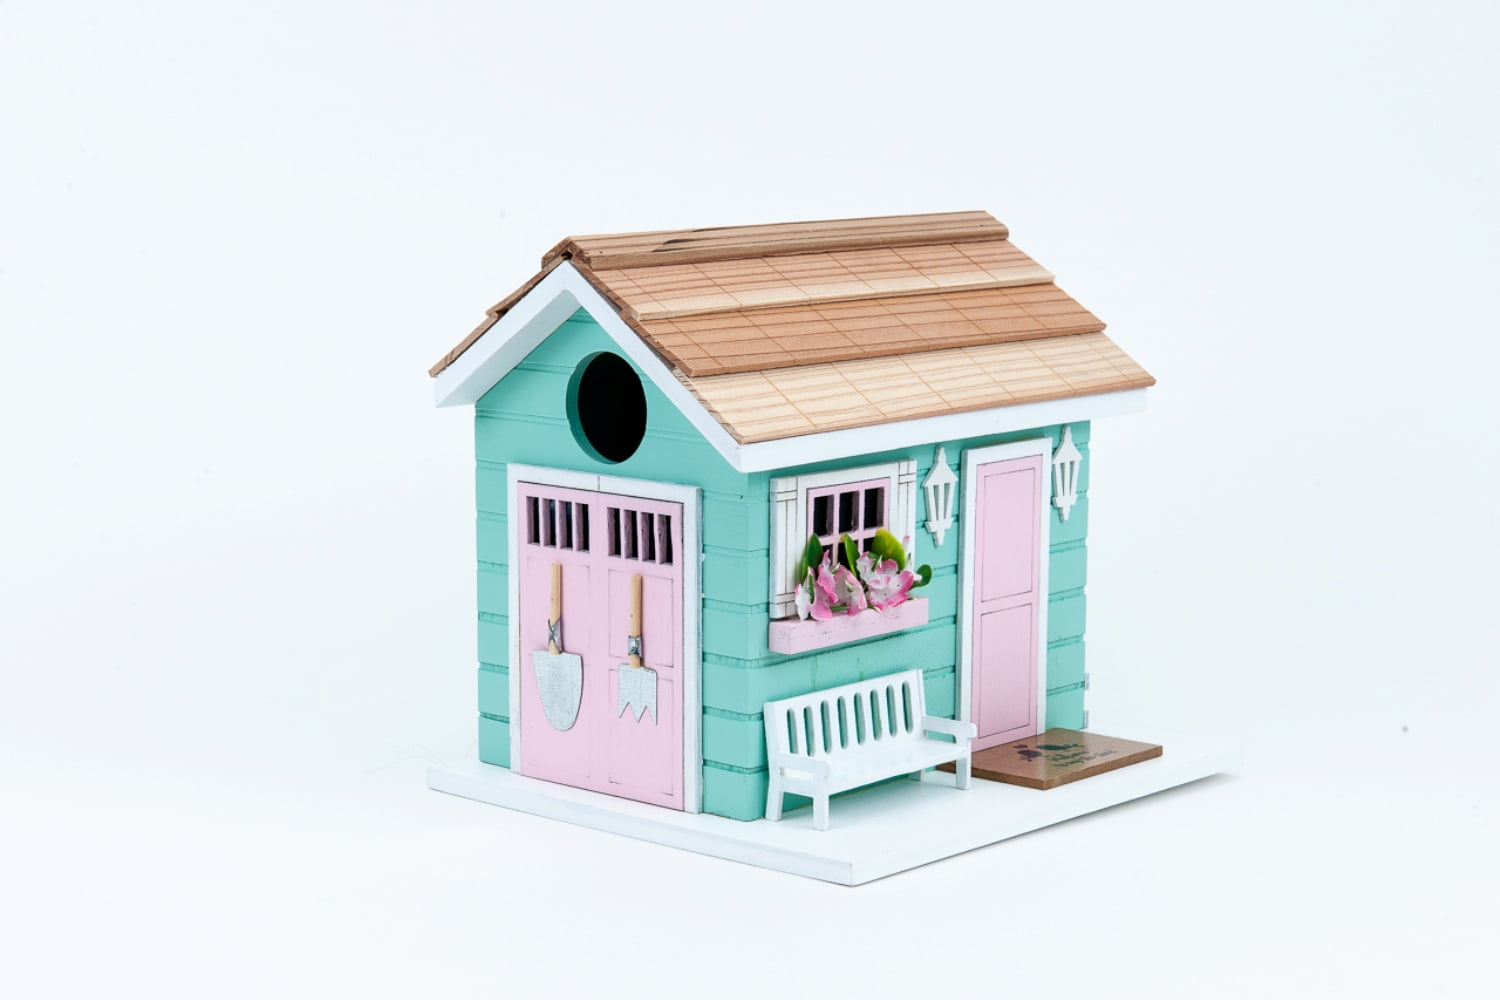 Home Bazaar She Shed Wooden Birdhouse, Mint and Pink - Walmart.com